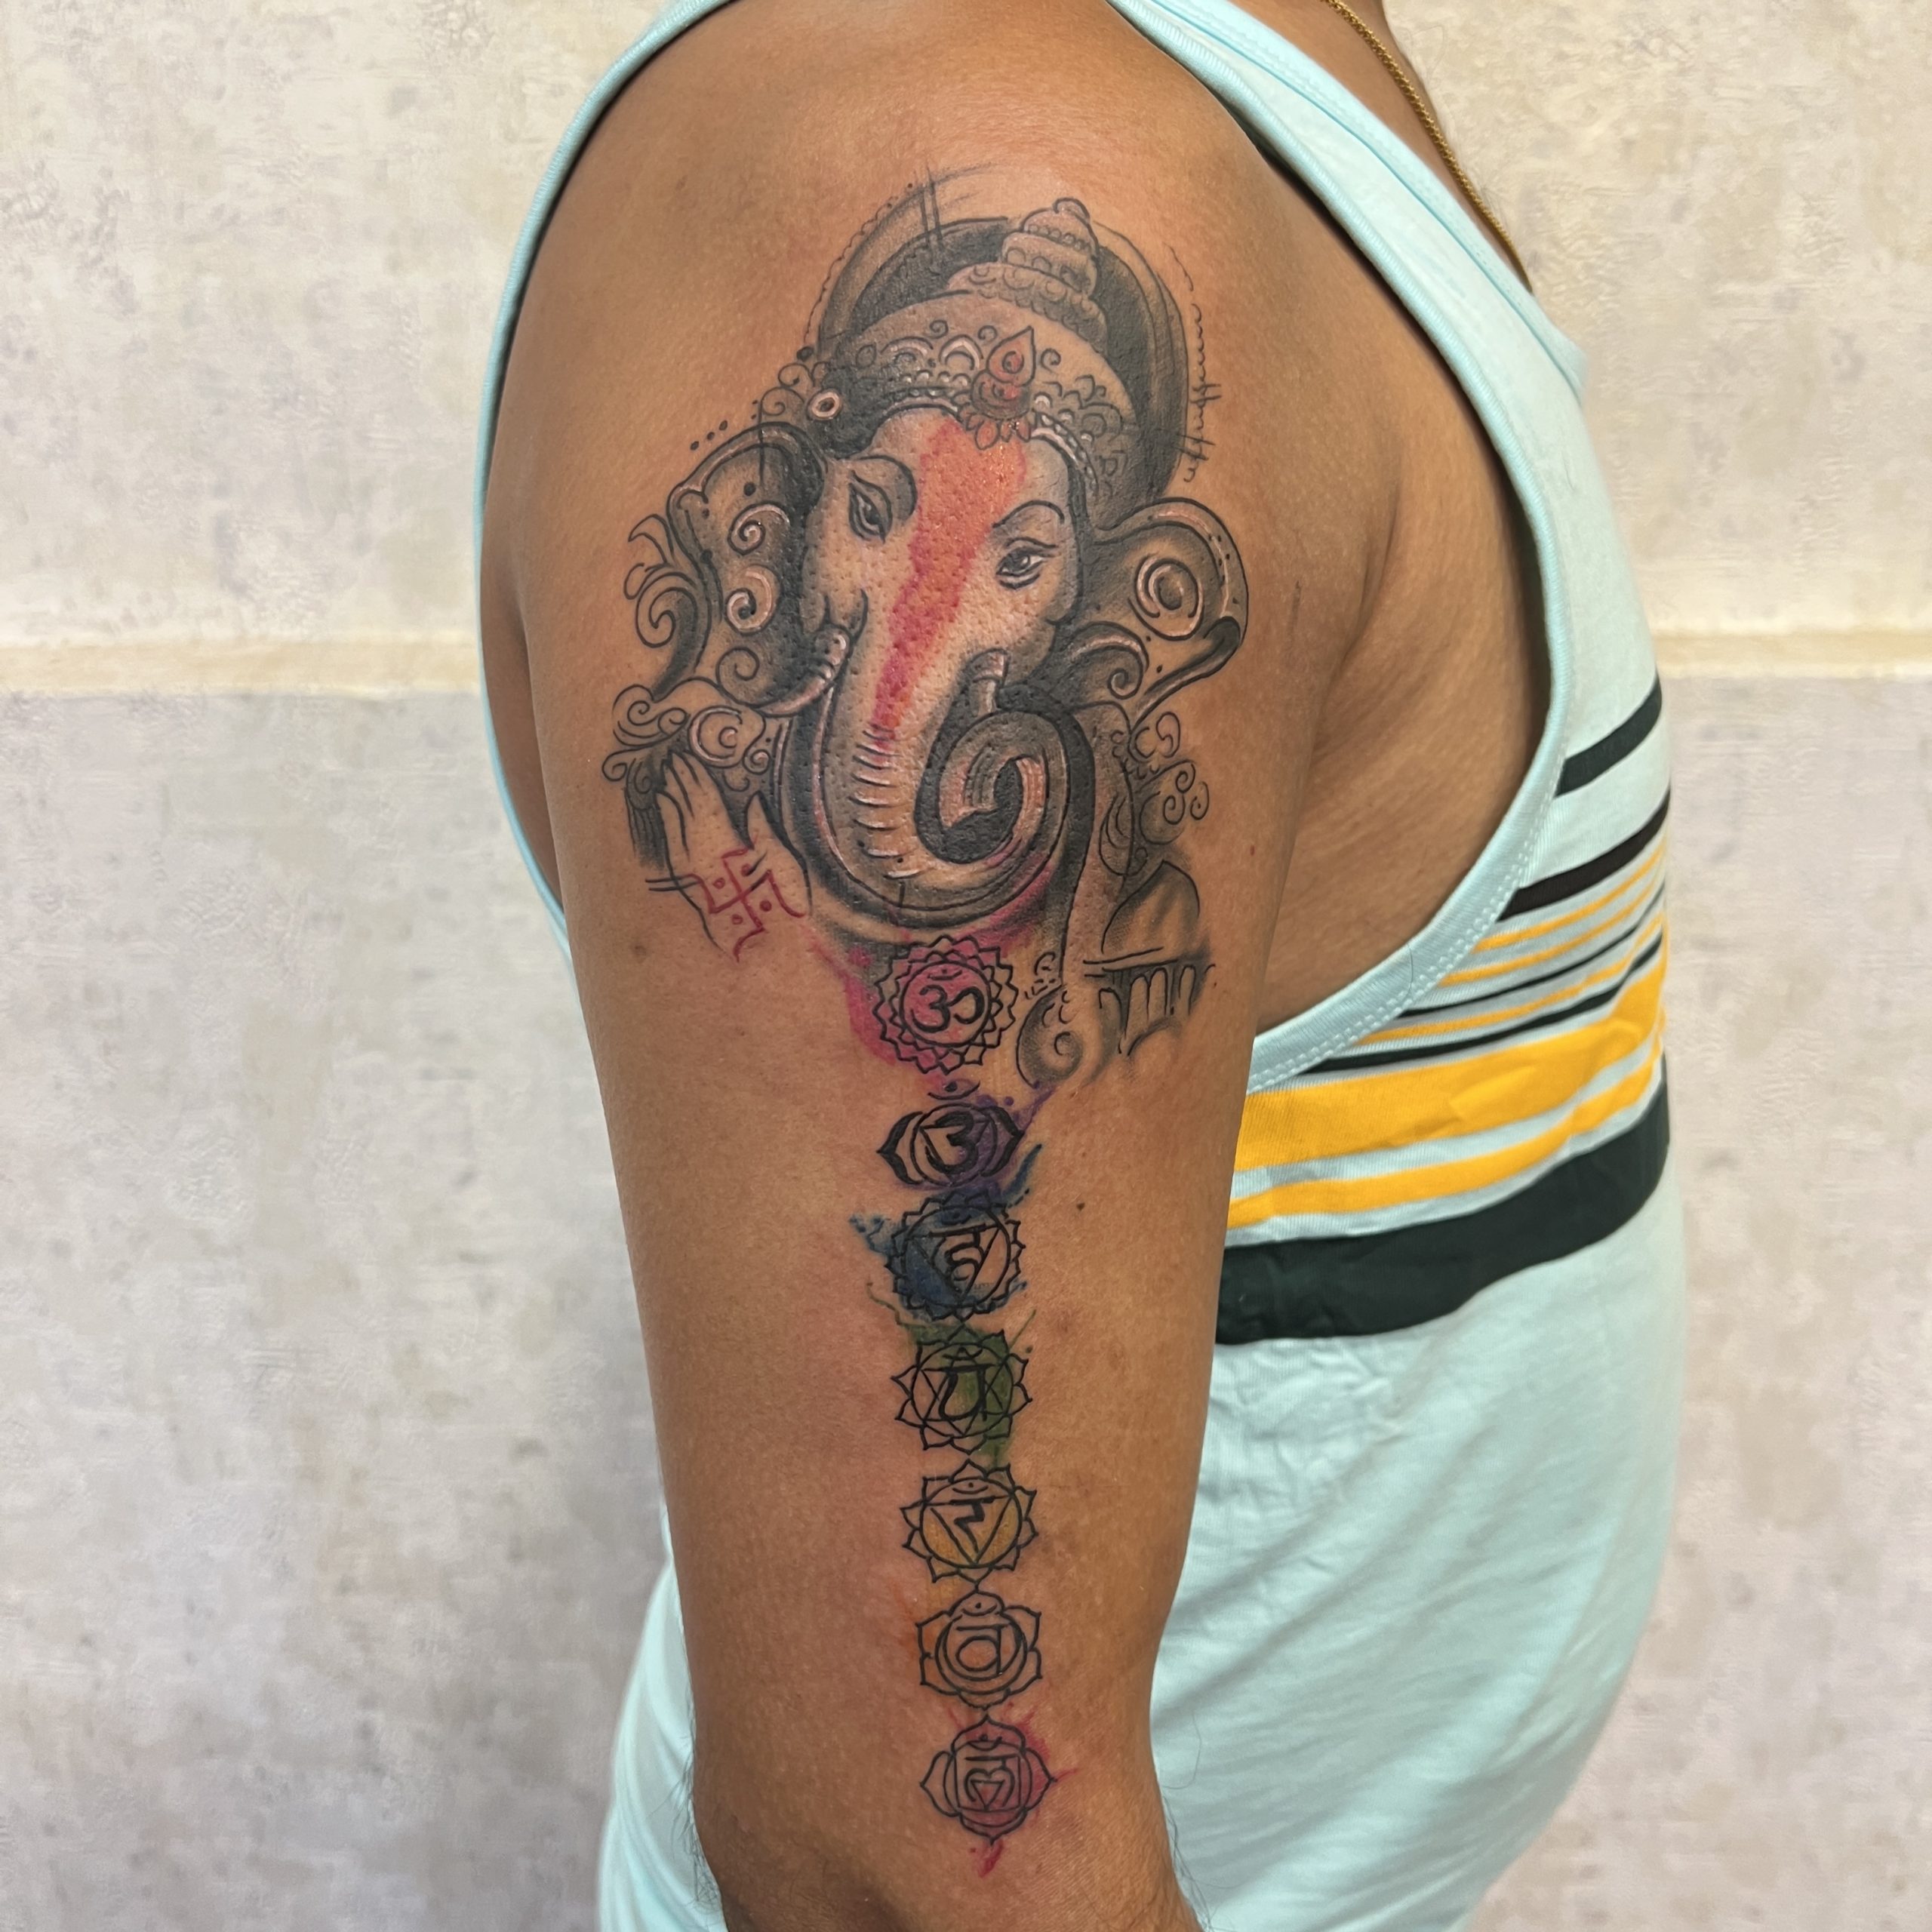 Auspicious Ganesha tattoos to bless your day